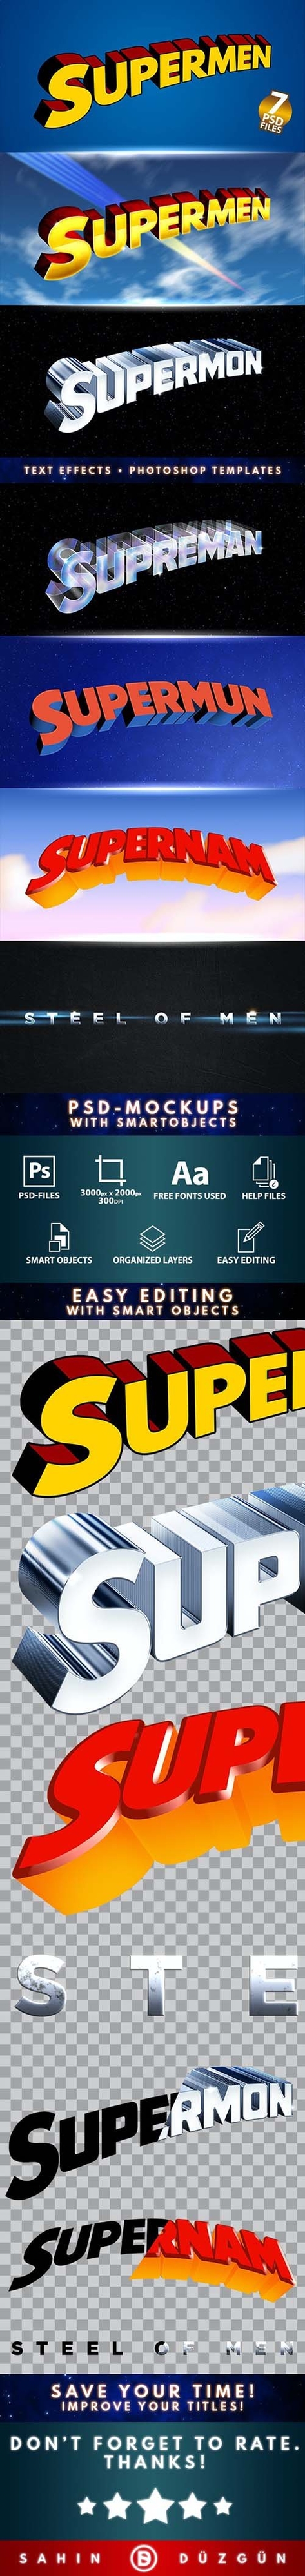 SUPERMEN | Text-Effects/Mockups | Template-Package